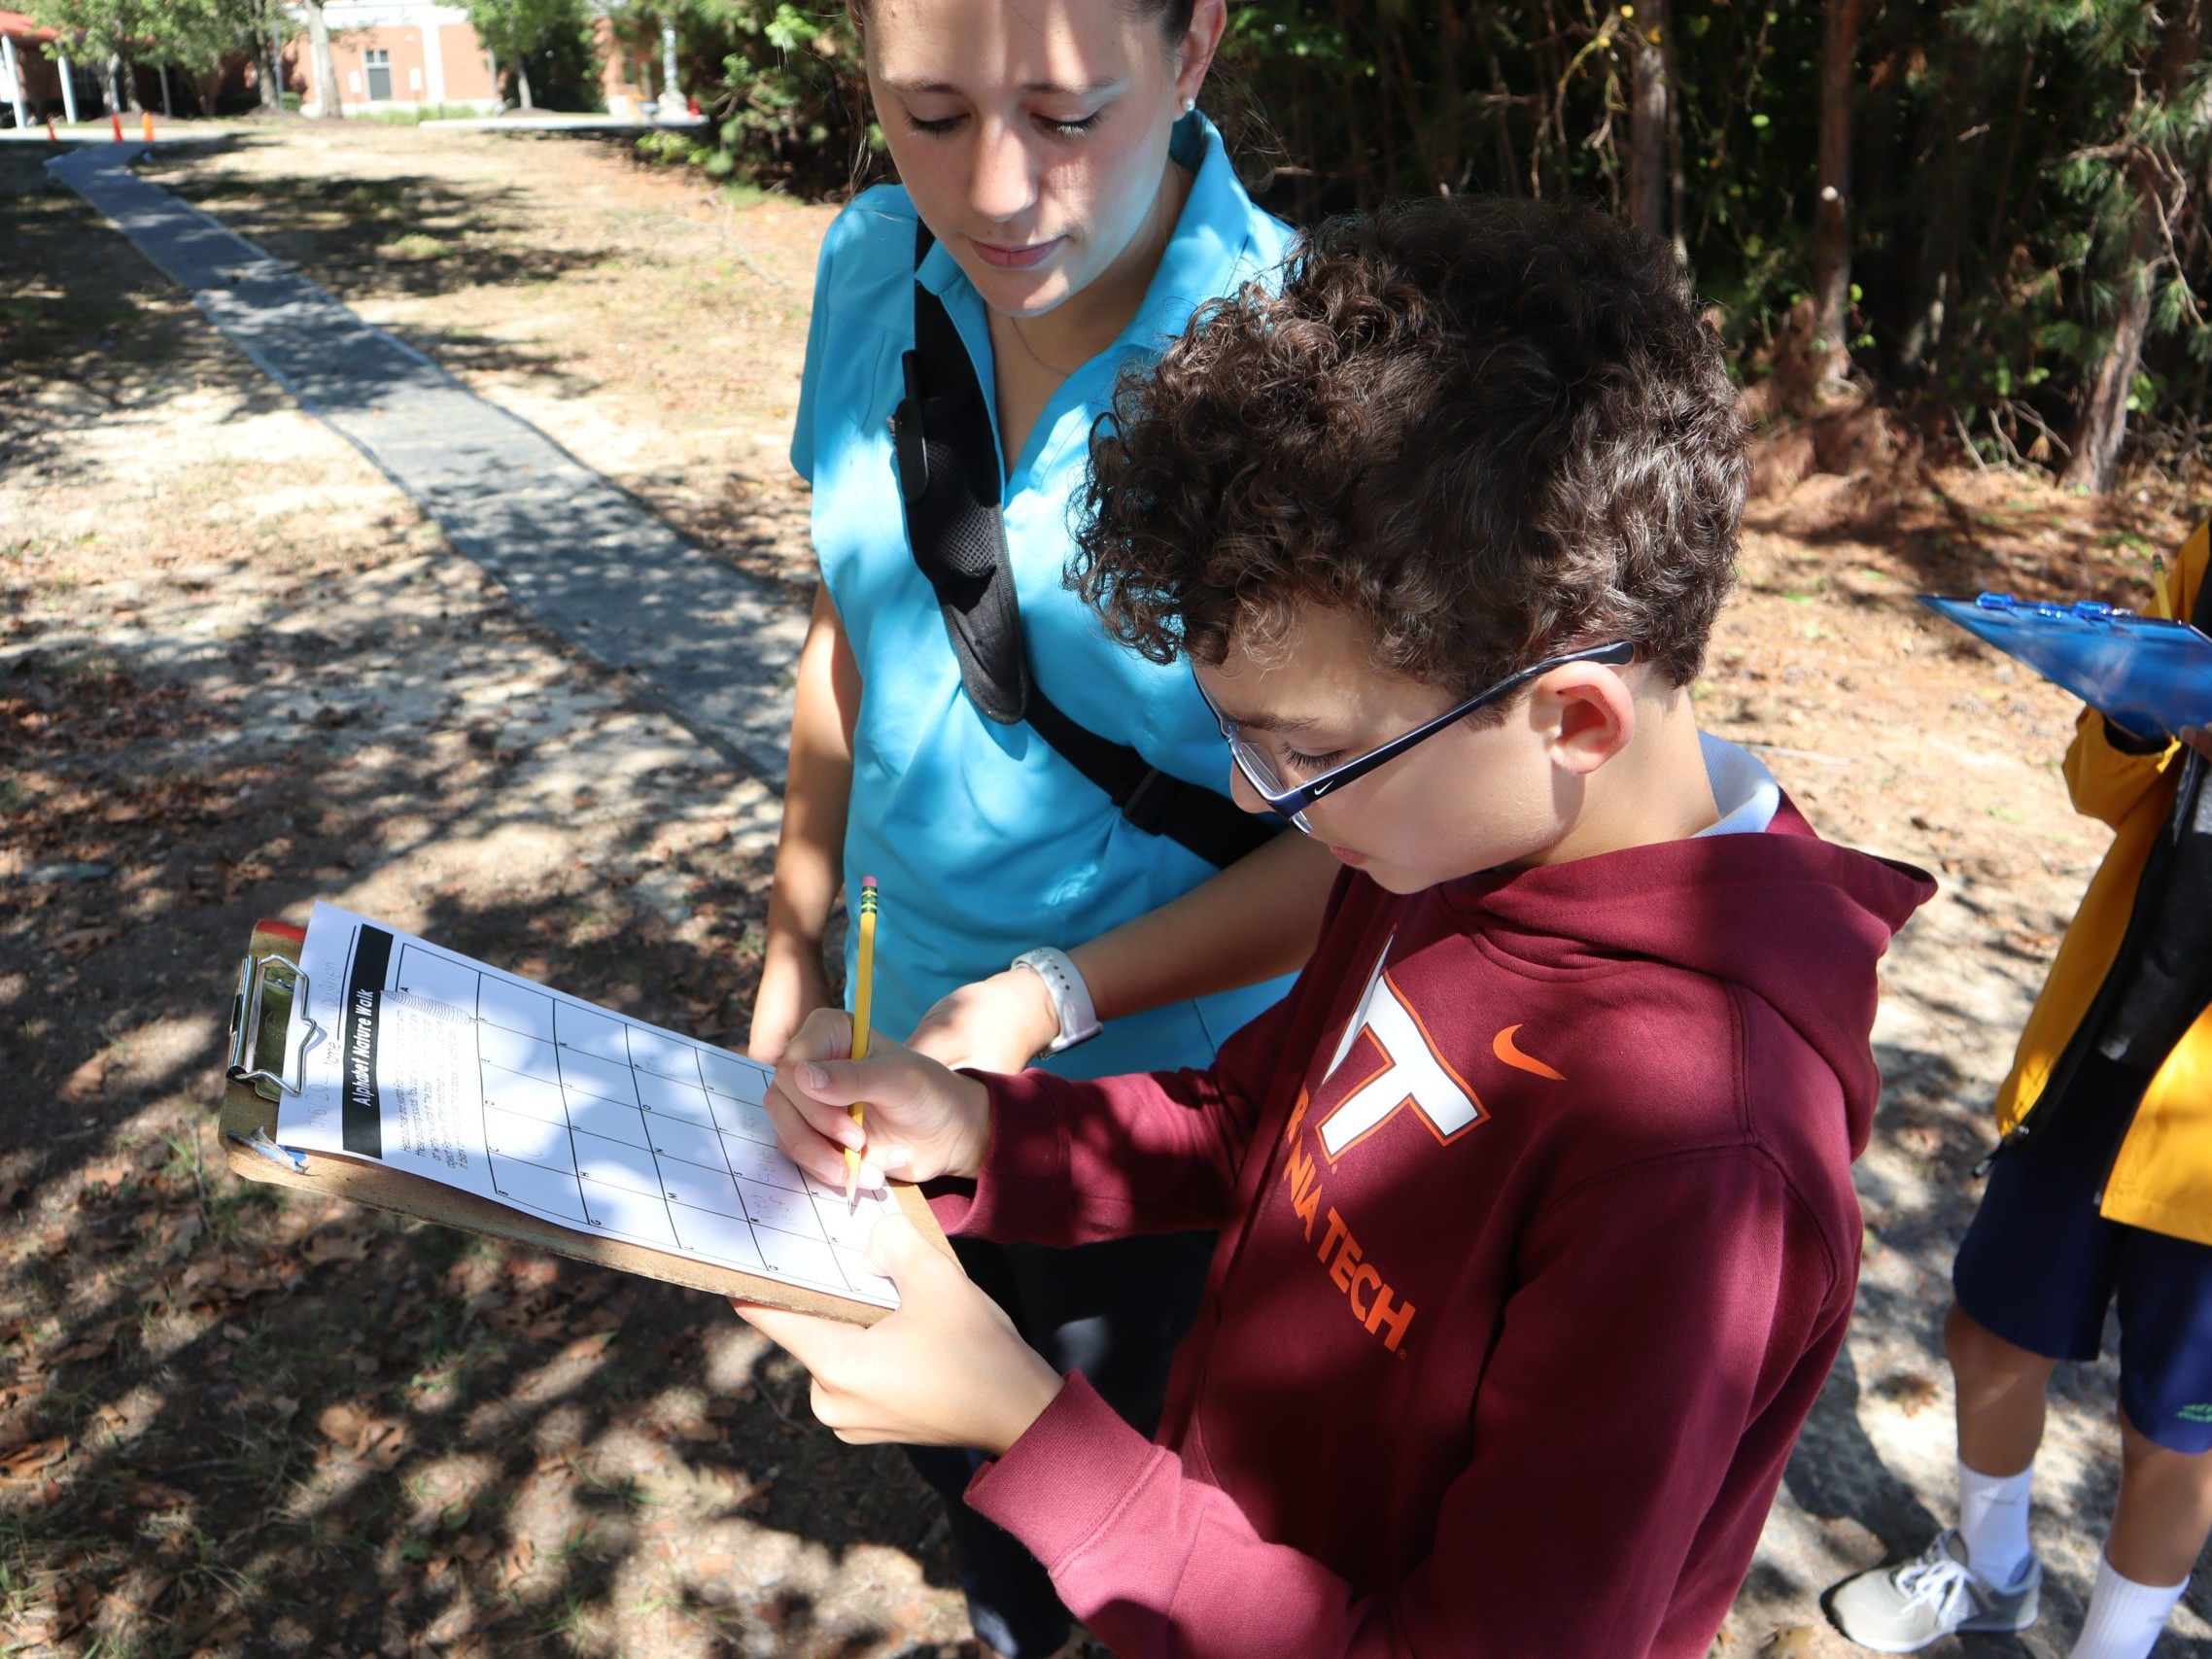 Student and teacher participating in an outdoor scavenger hunt